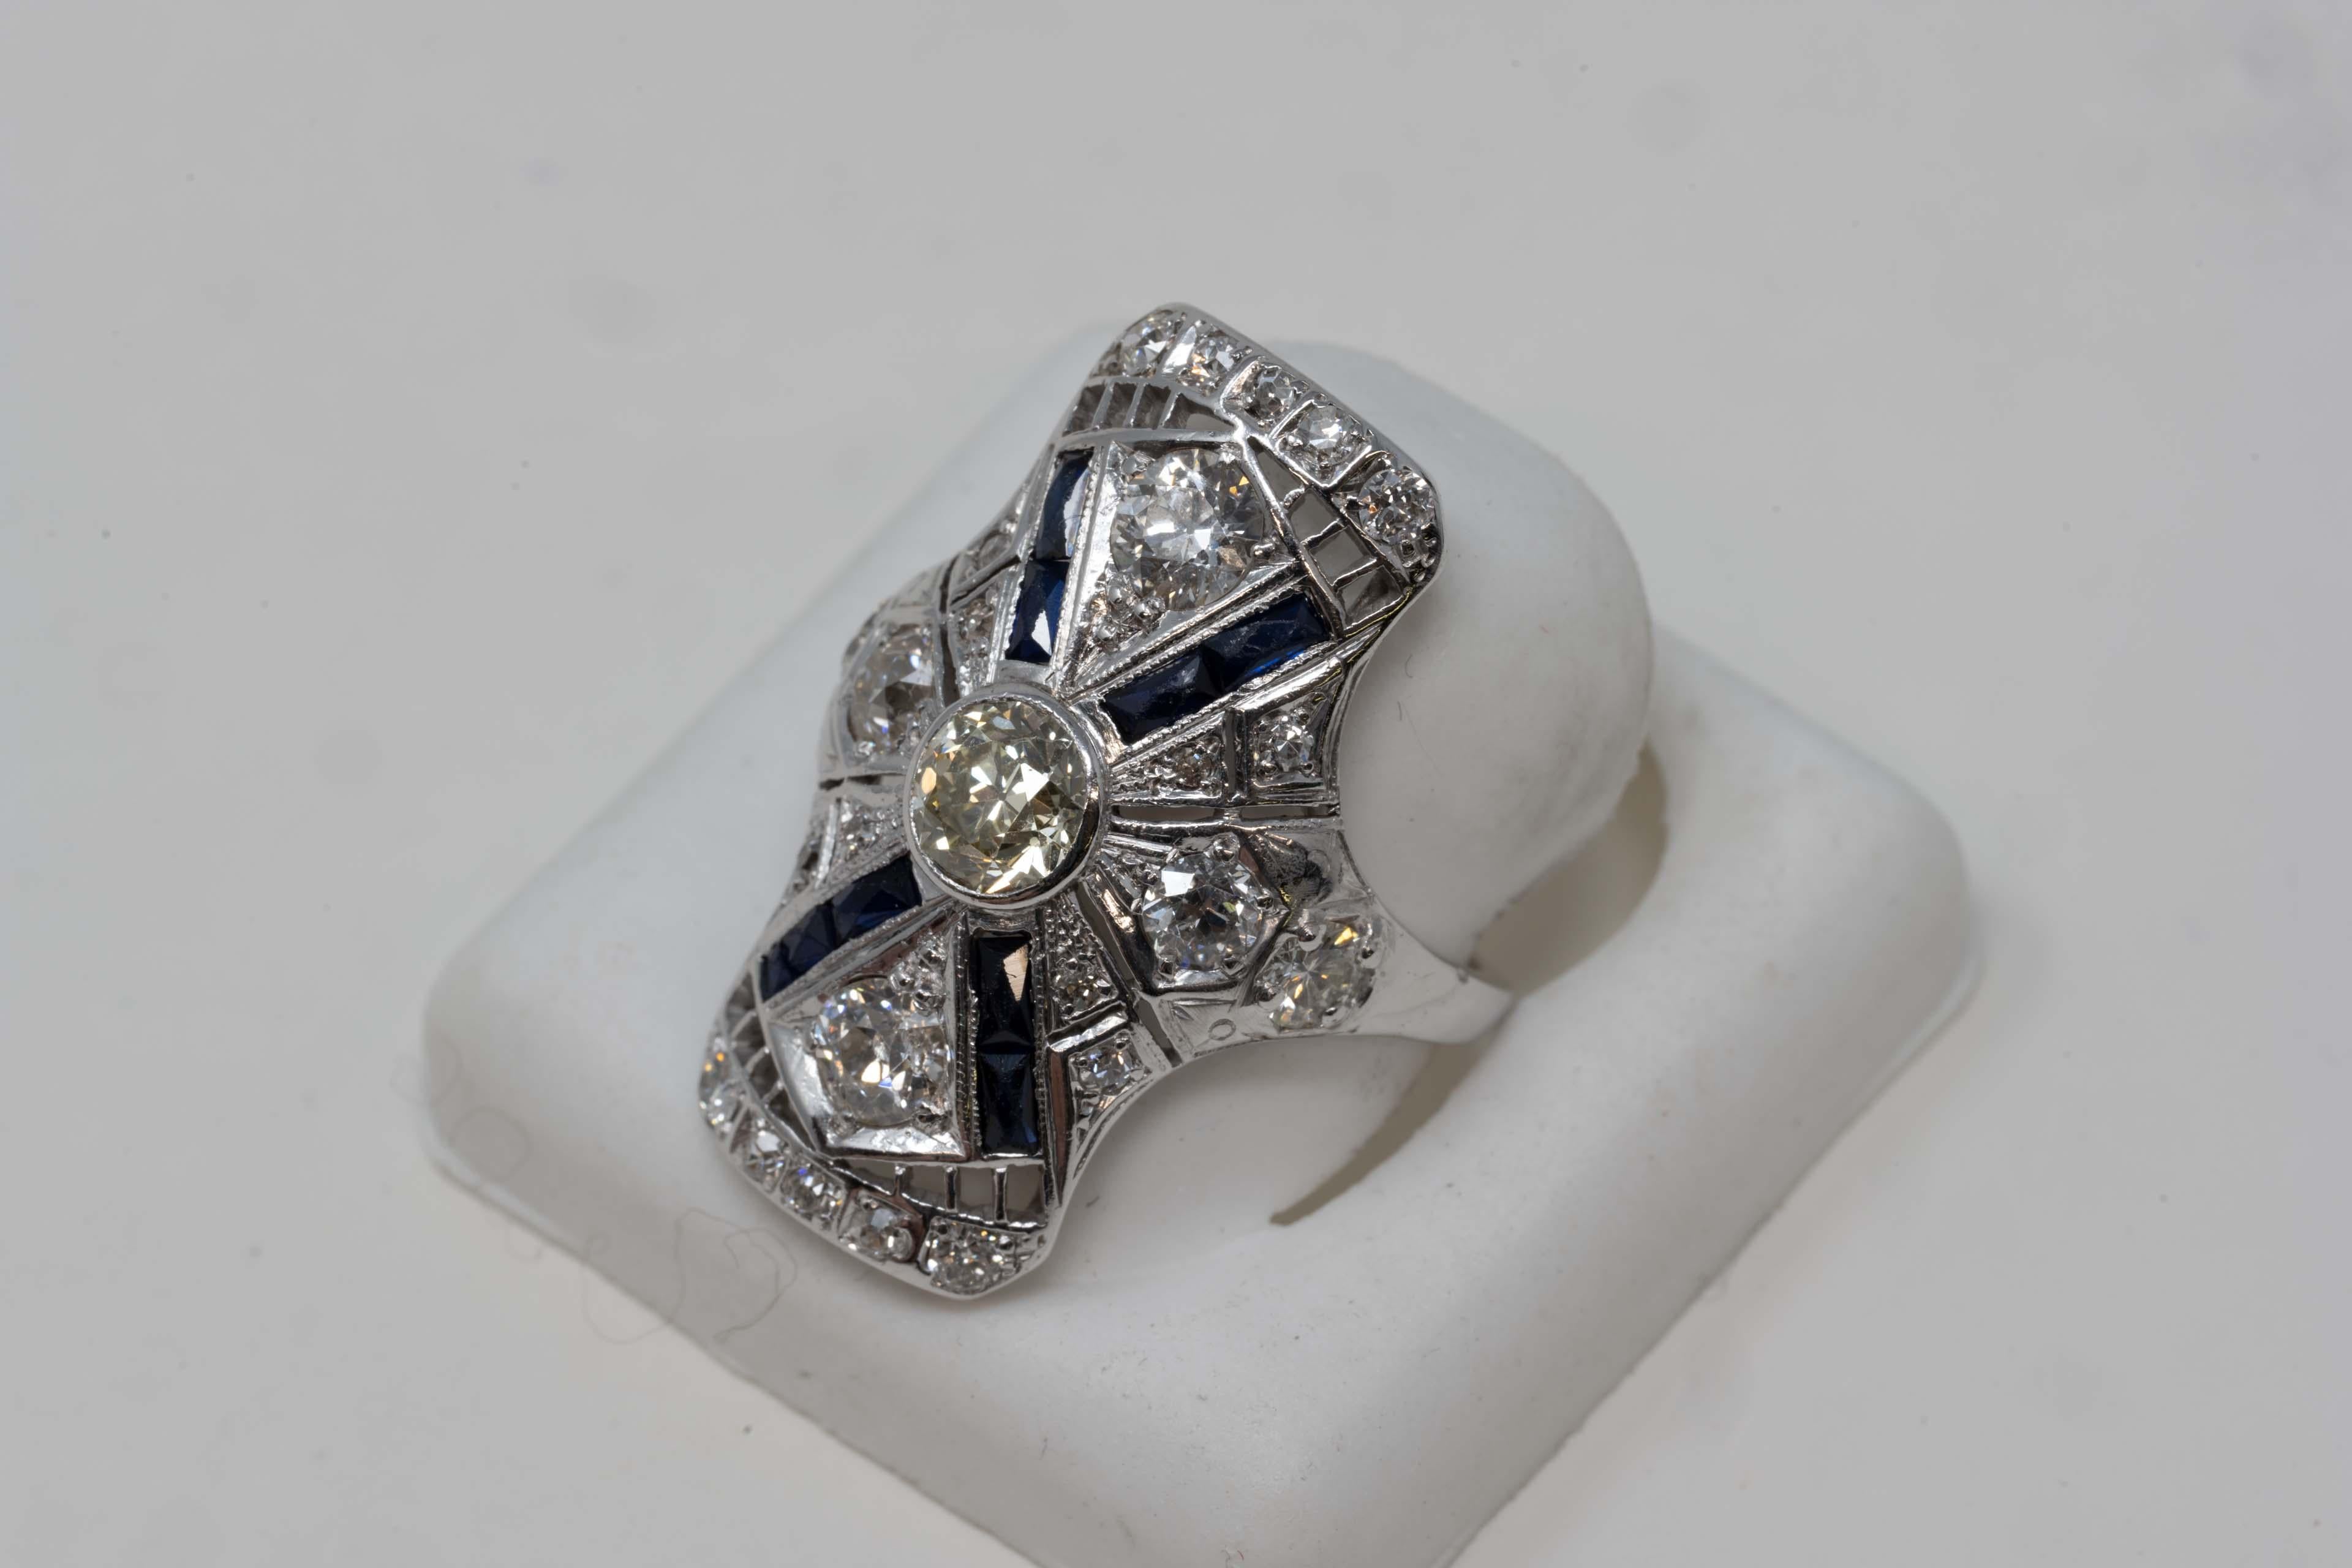 One (1) lady ring in white 14 karat gold (stamped) art deco filigree style, polished and rhodium finish. The total weight is 5.5 grams. This ring is set with one (1) old European cut diamond, the weight is .75 karat. Measurements are 5.80mm x